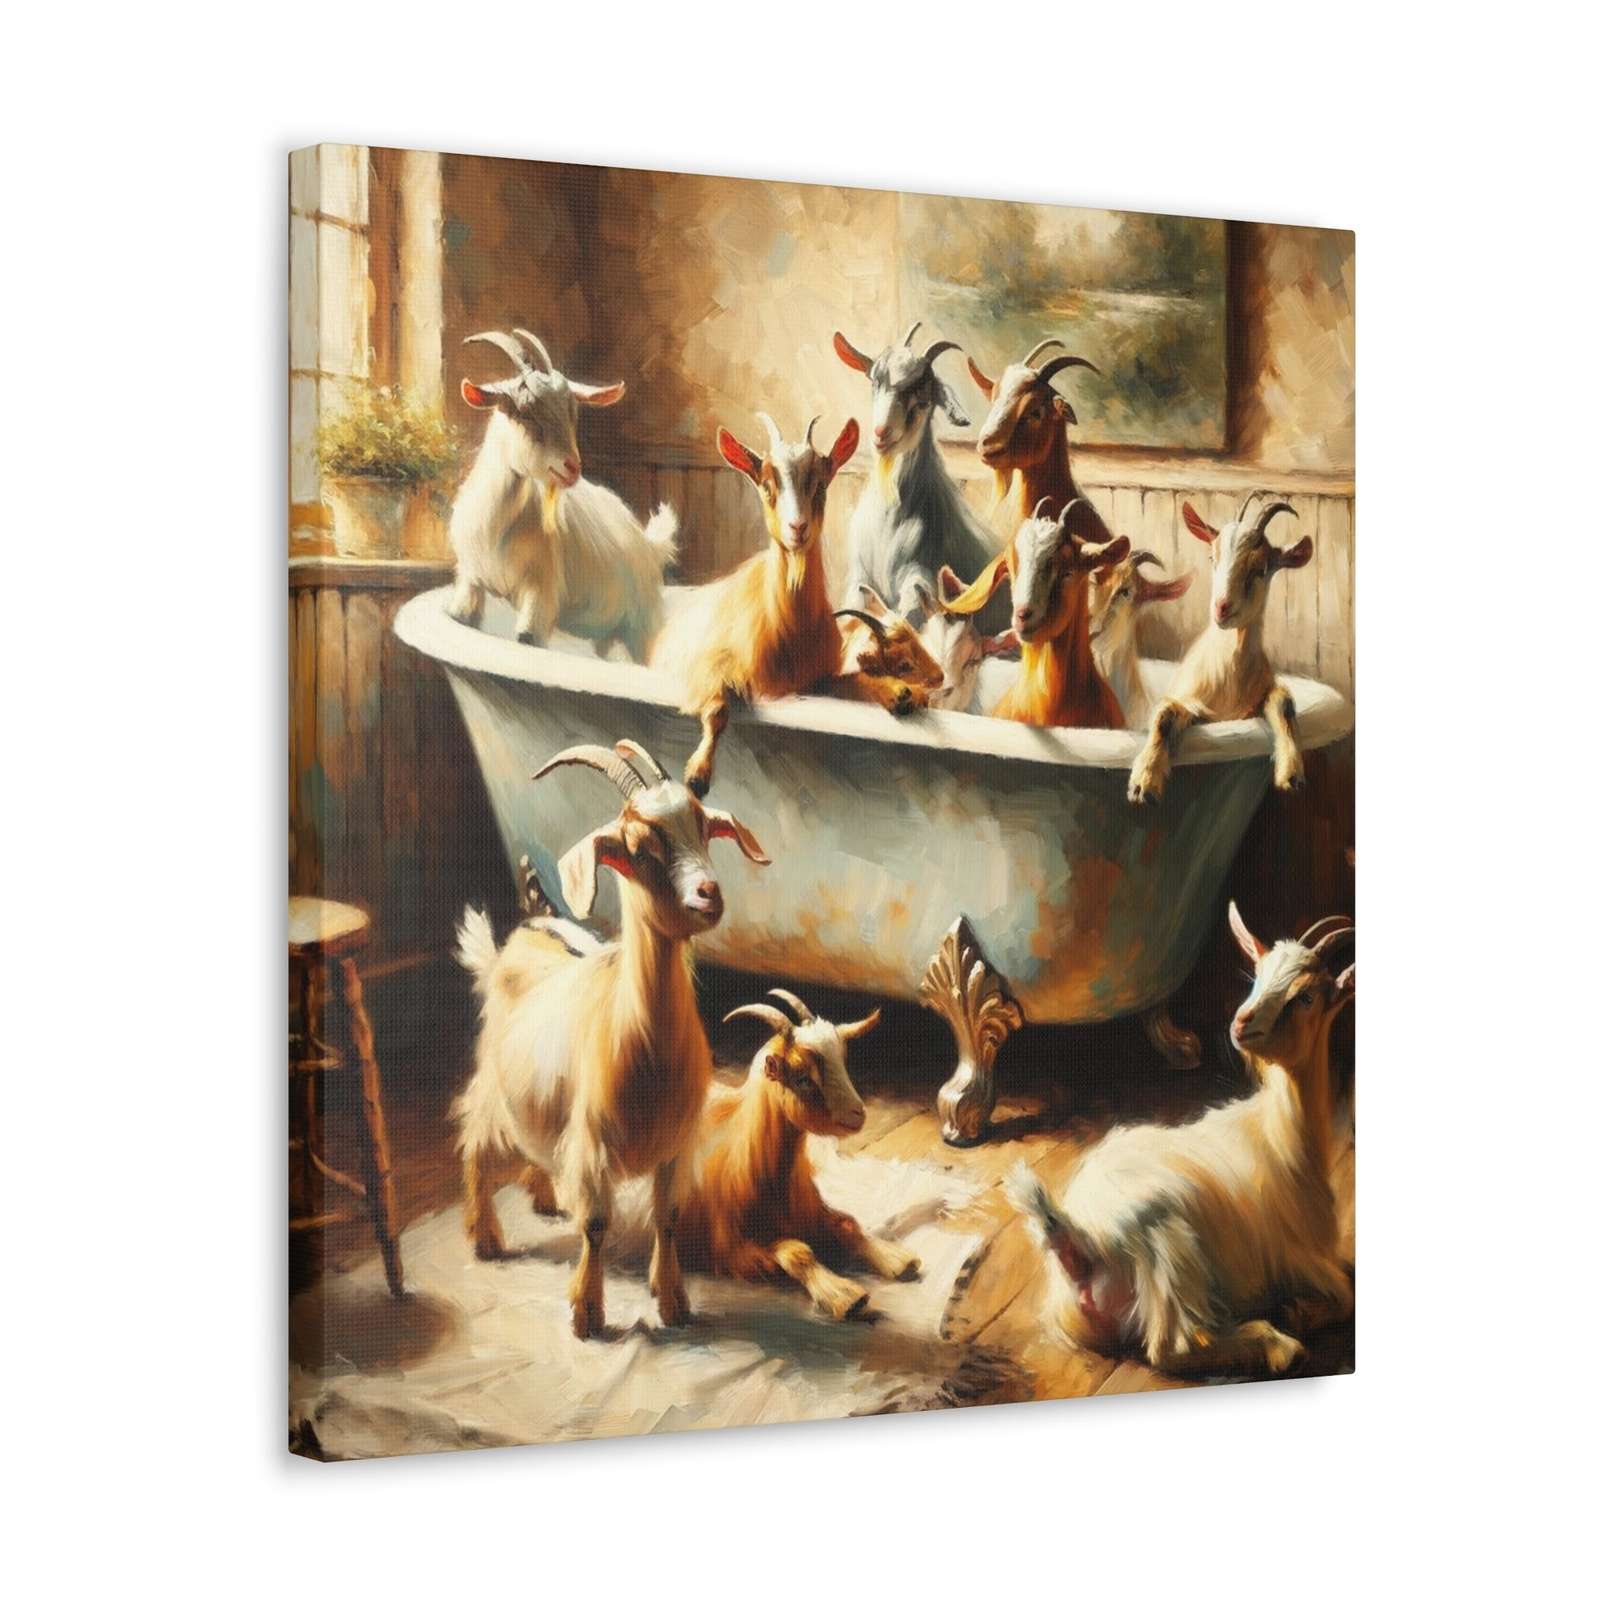 The Goat- Canvas